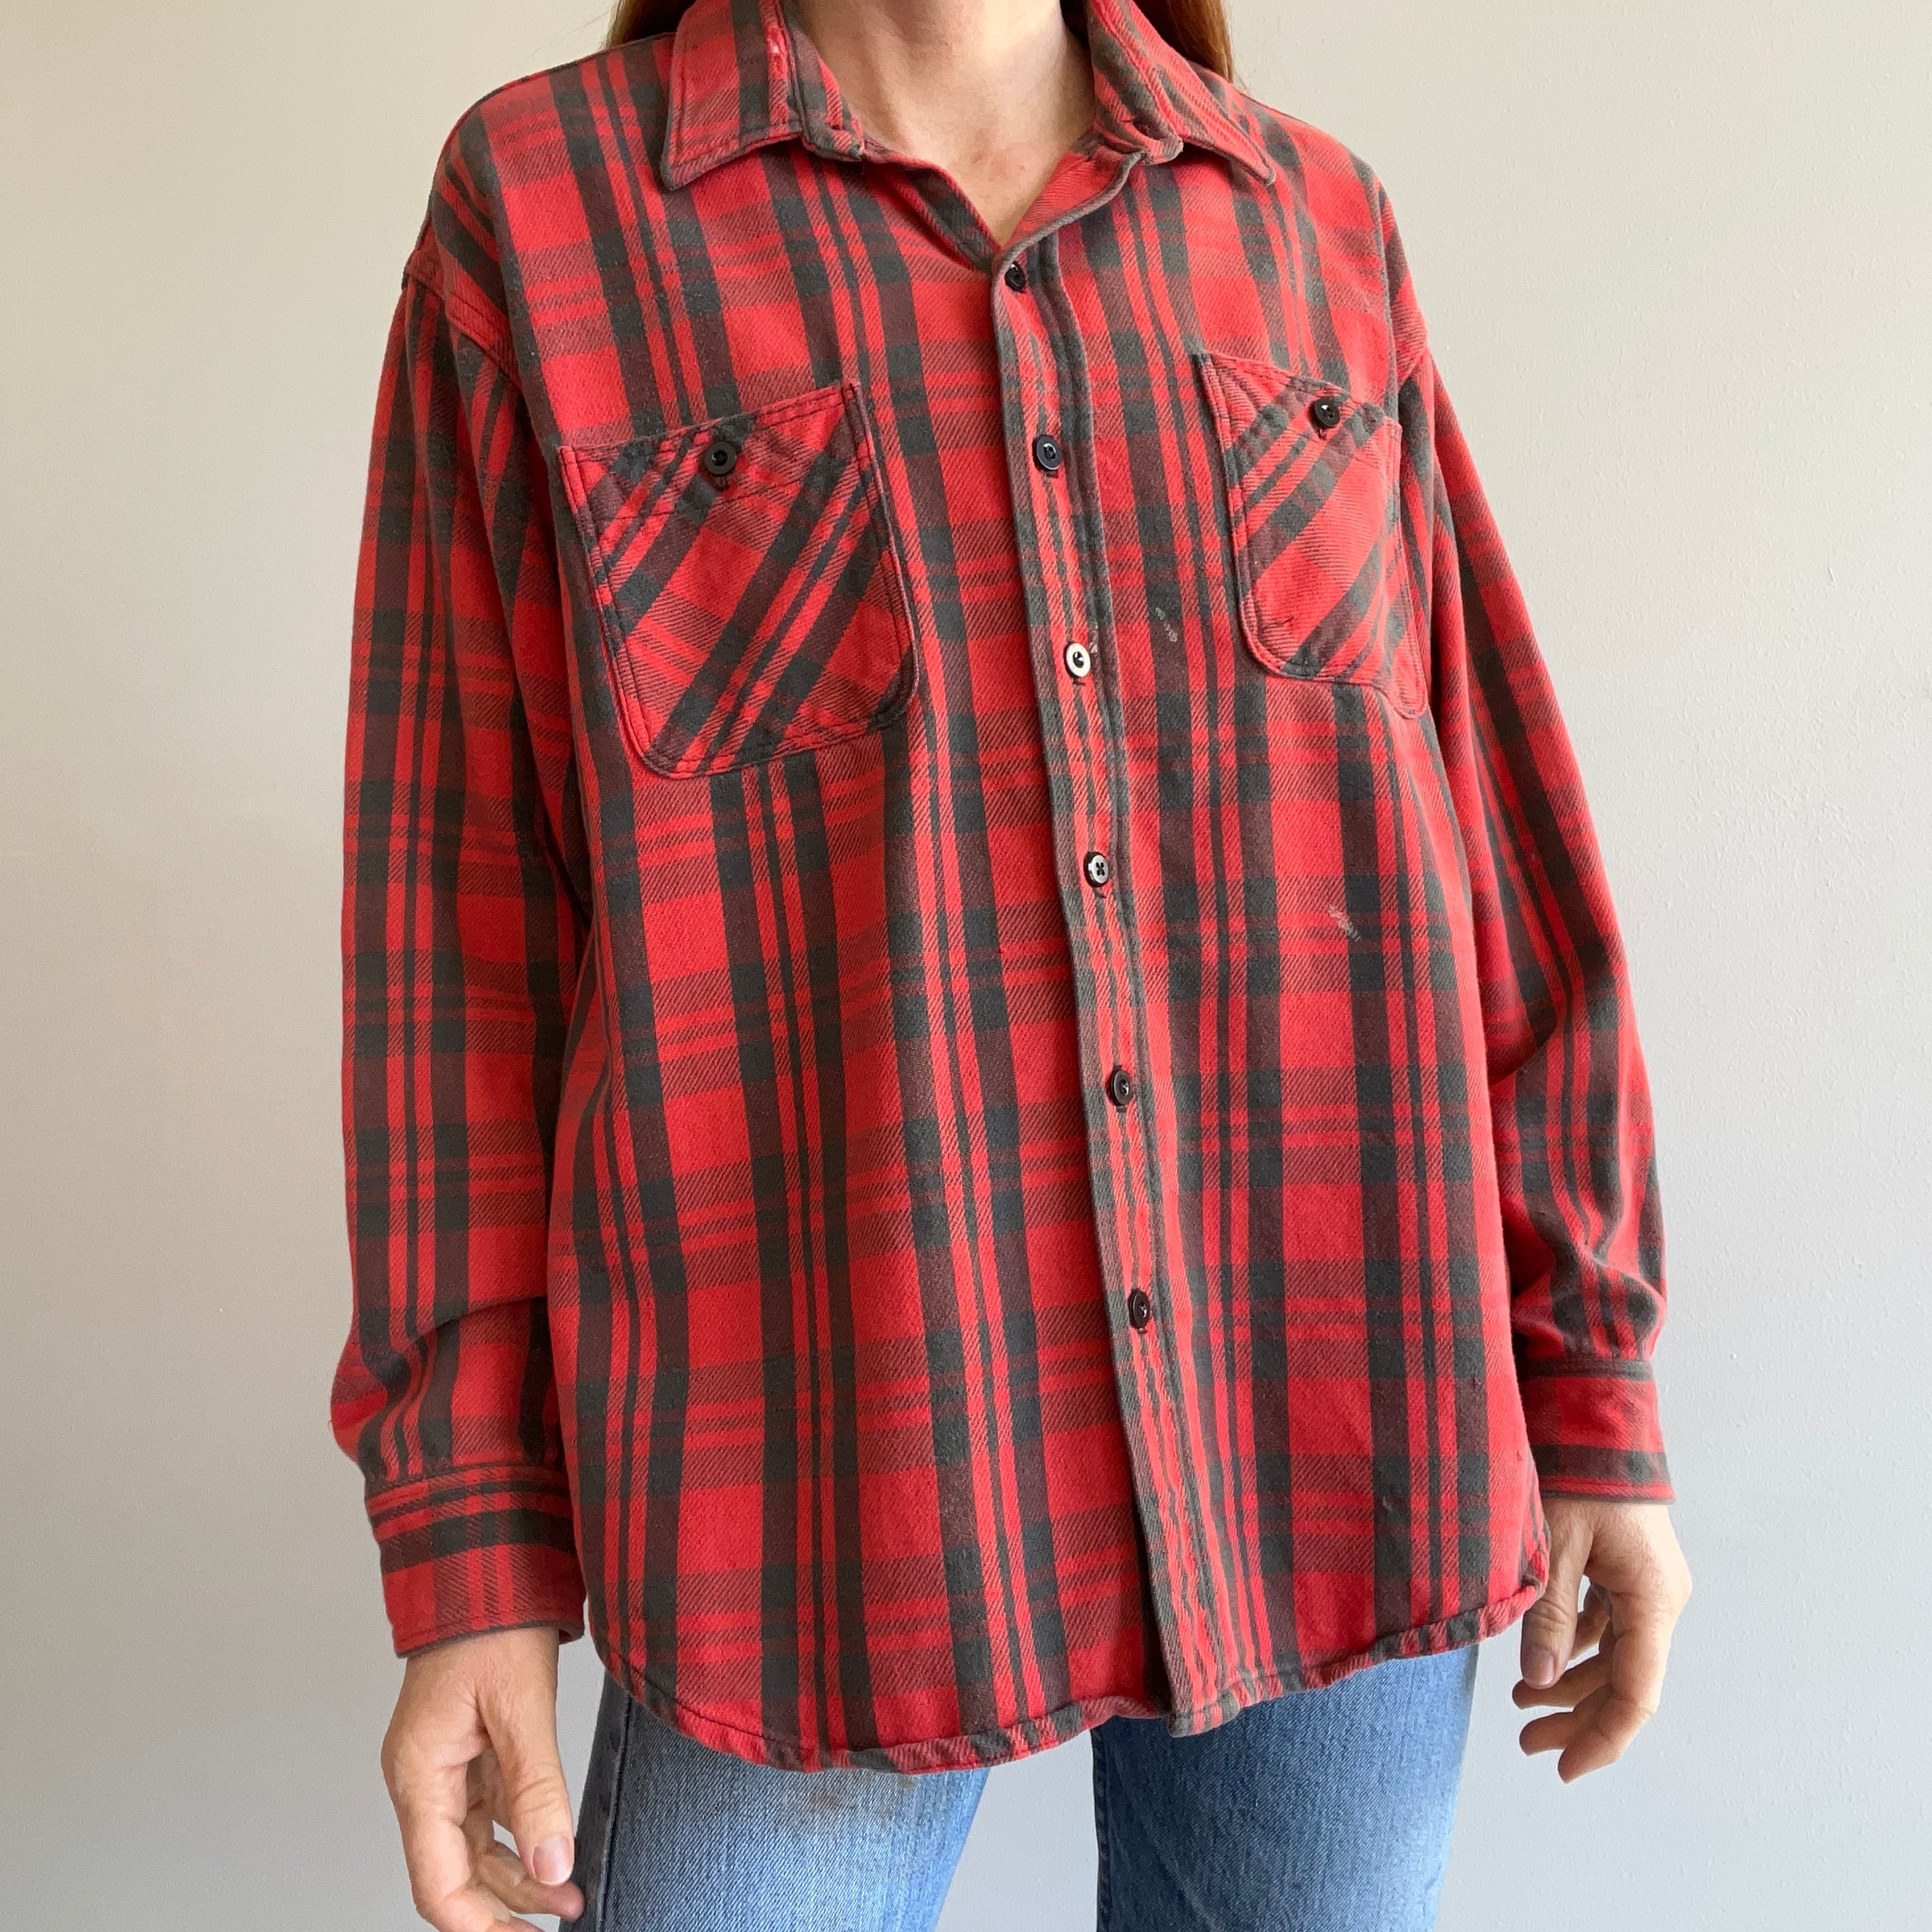 1990s Boxy Mended Cotton Flannel - THIS IS RAD (IMO)